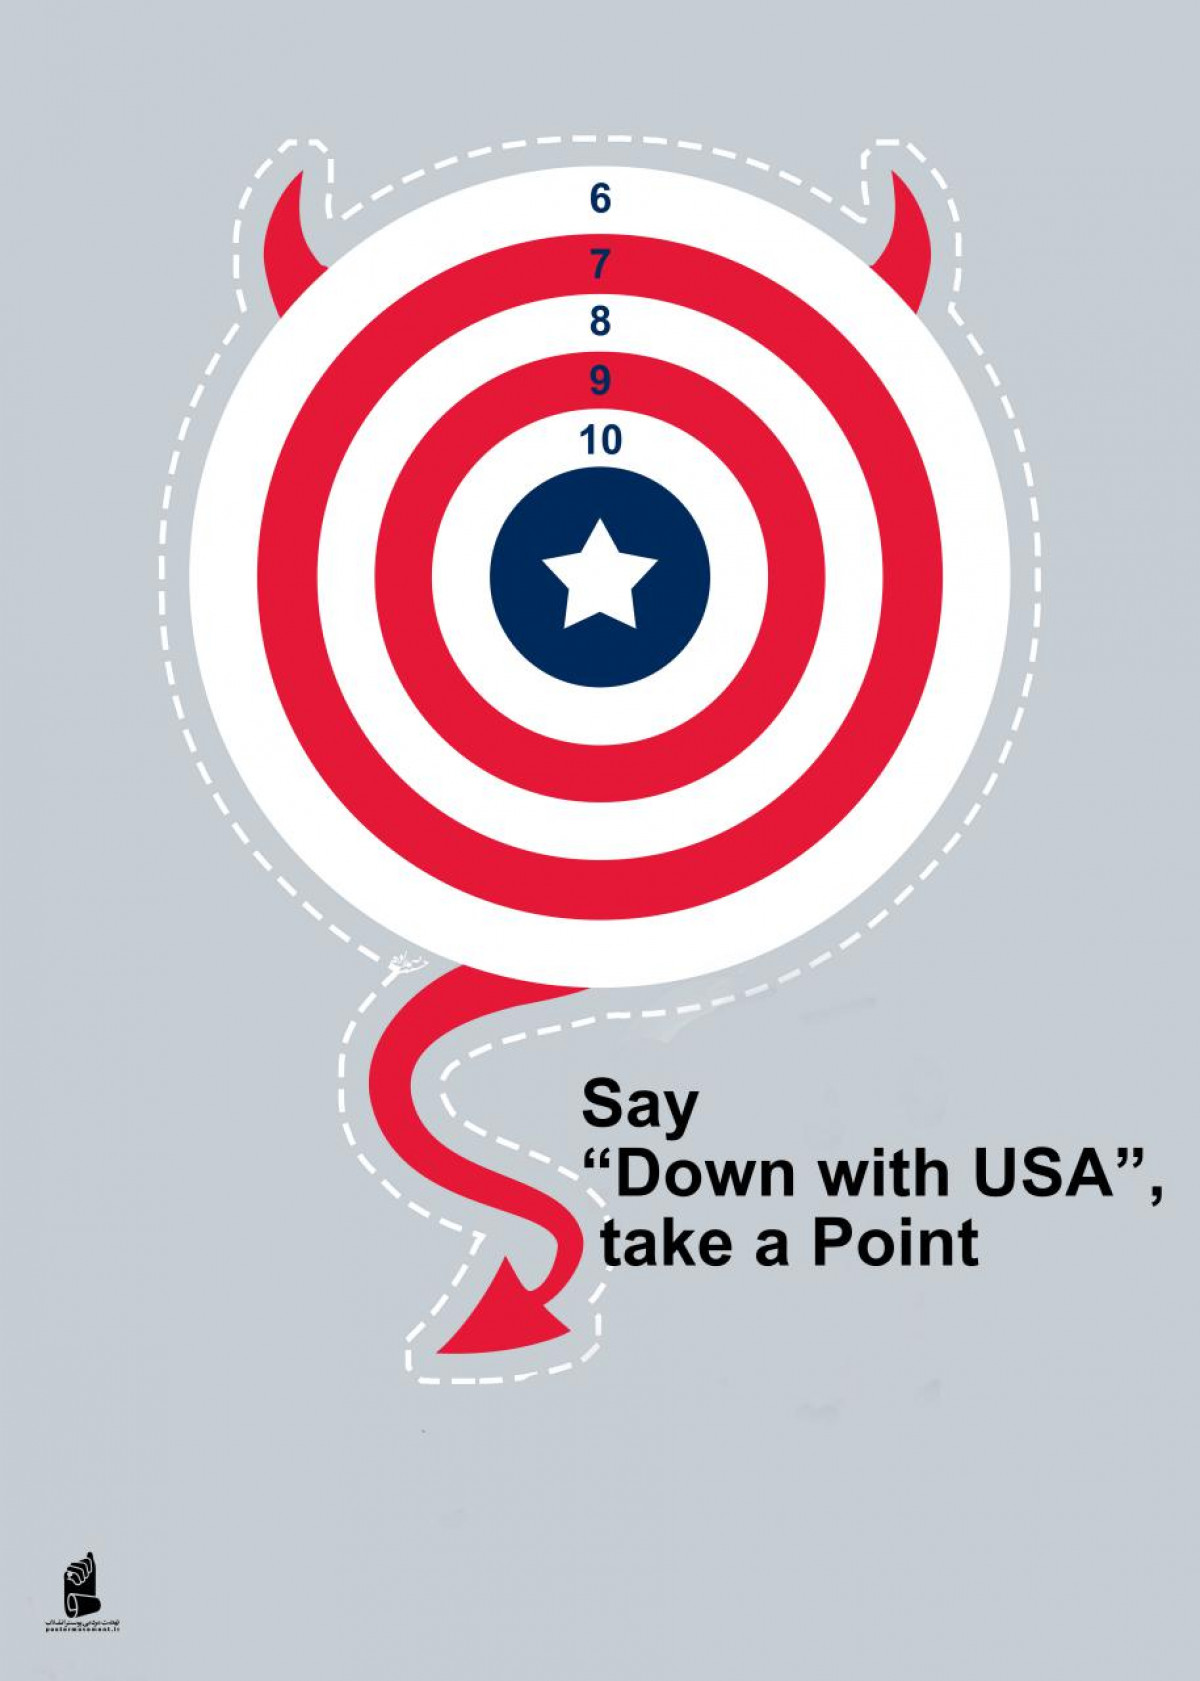 Say "Down with USA”, take a Point